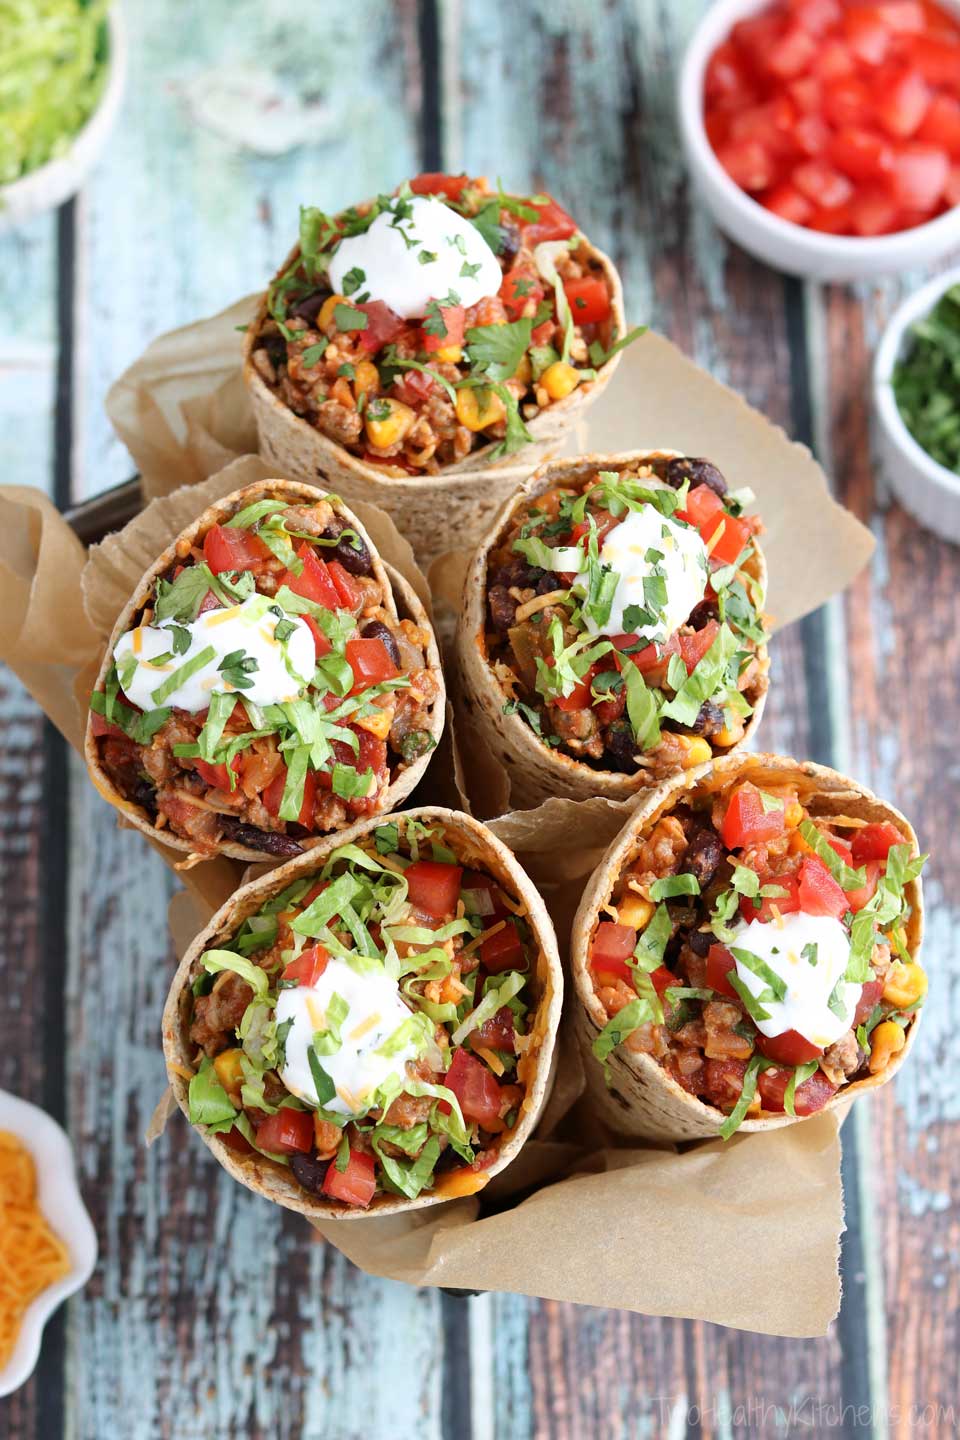 Ta-Cones are as fun as they sound … a fiesta taco party just waiting to happen! They’re great for “Taco Tuesday” dinner, but also for a crowd! You can make up a batch like these five and have them ready for party guests to grab, or you can let guests make their own at a DIY Taco Bar – so fun!